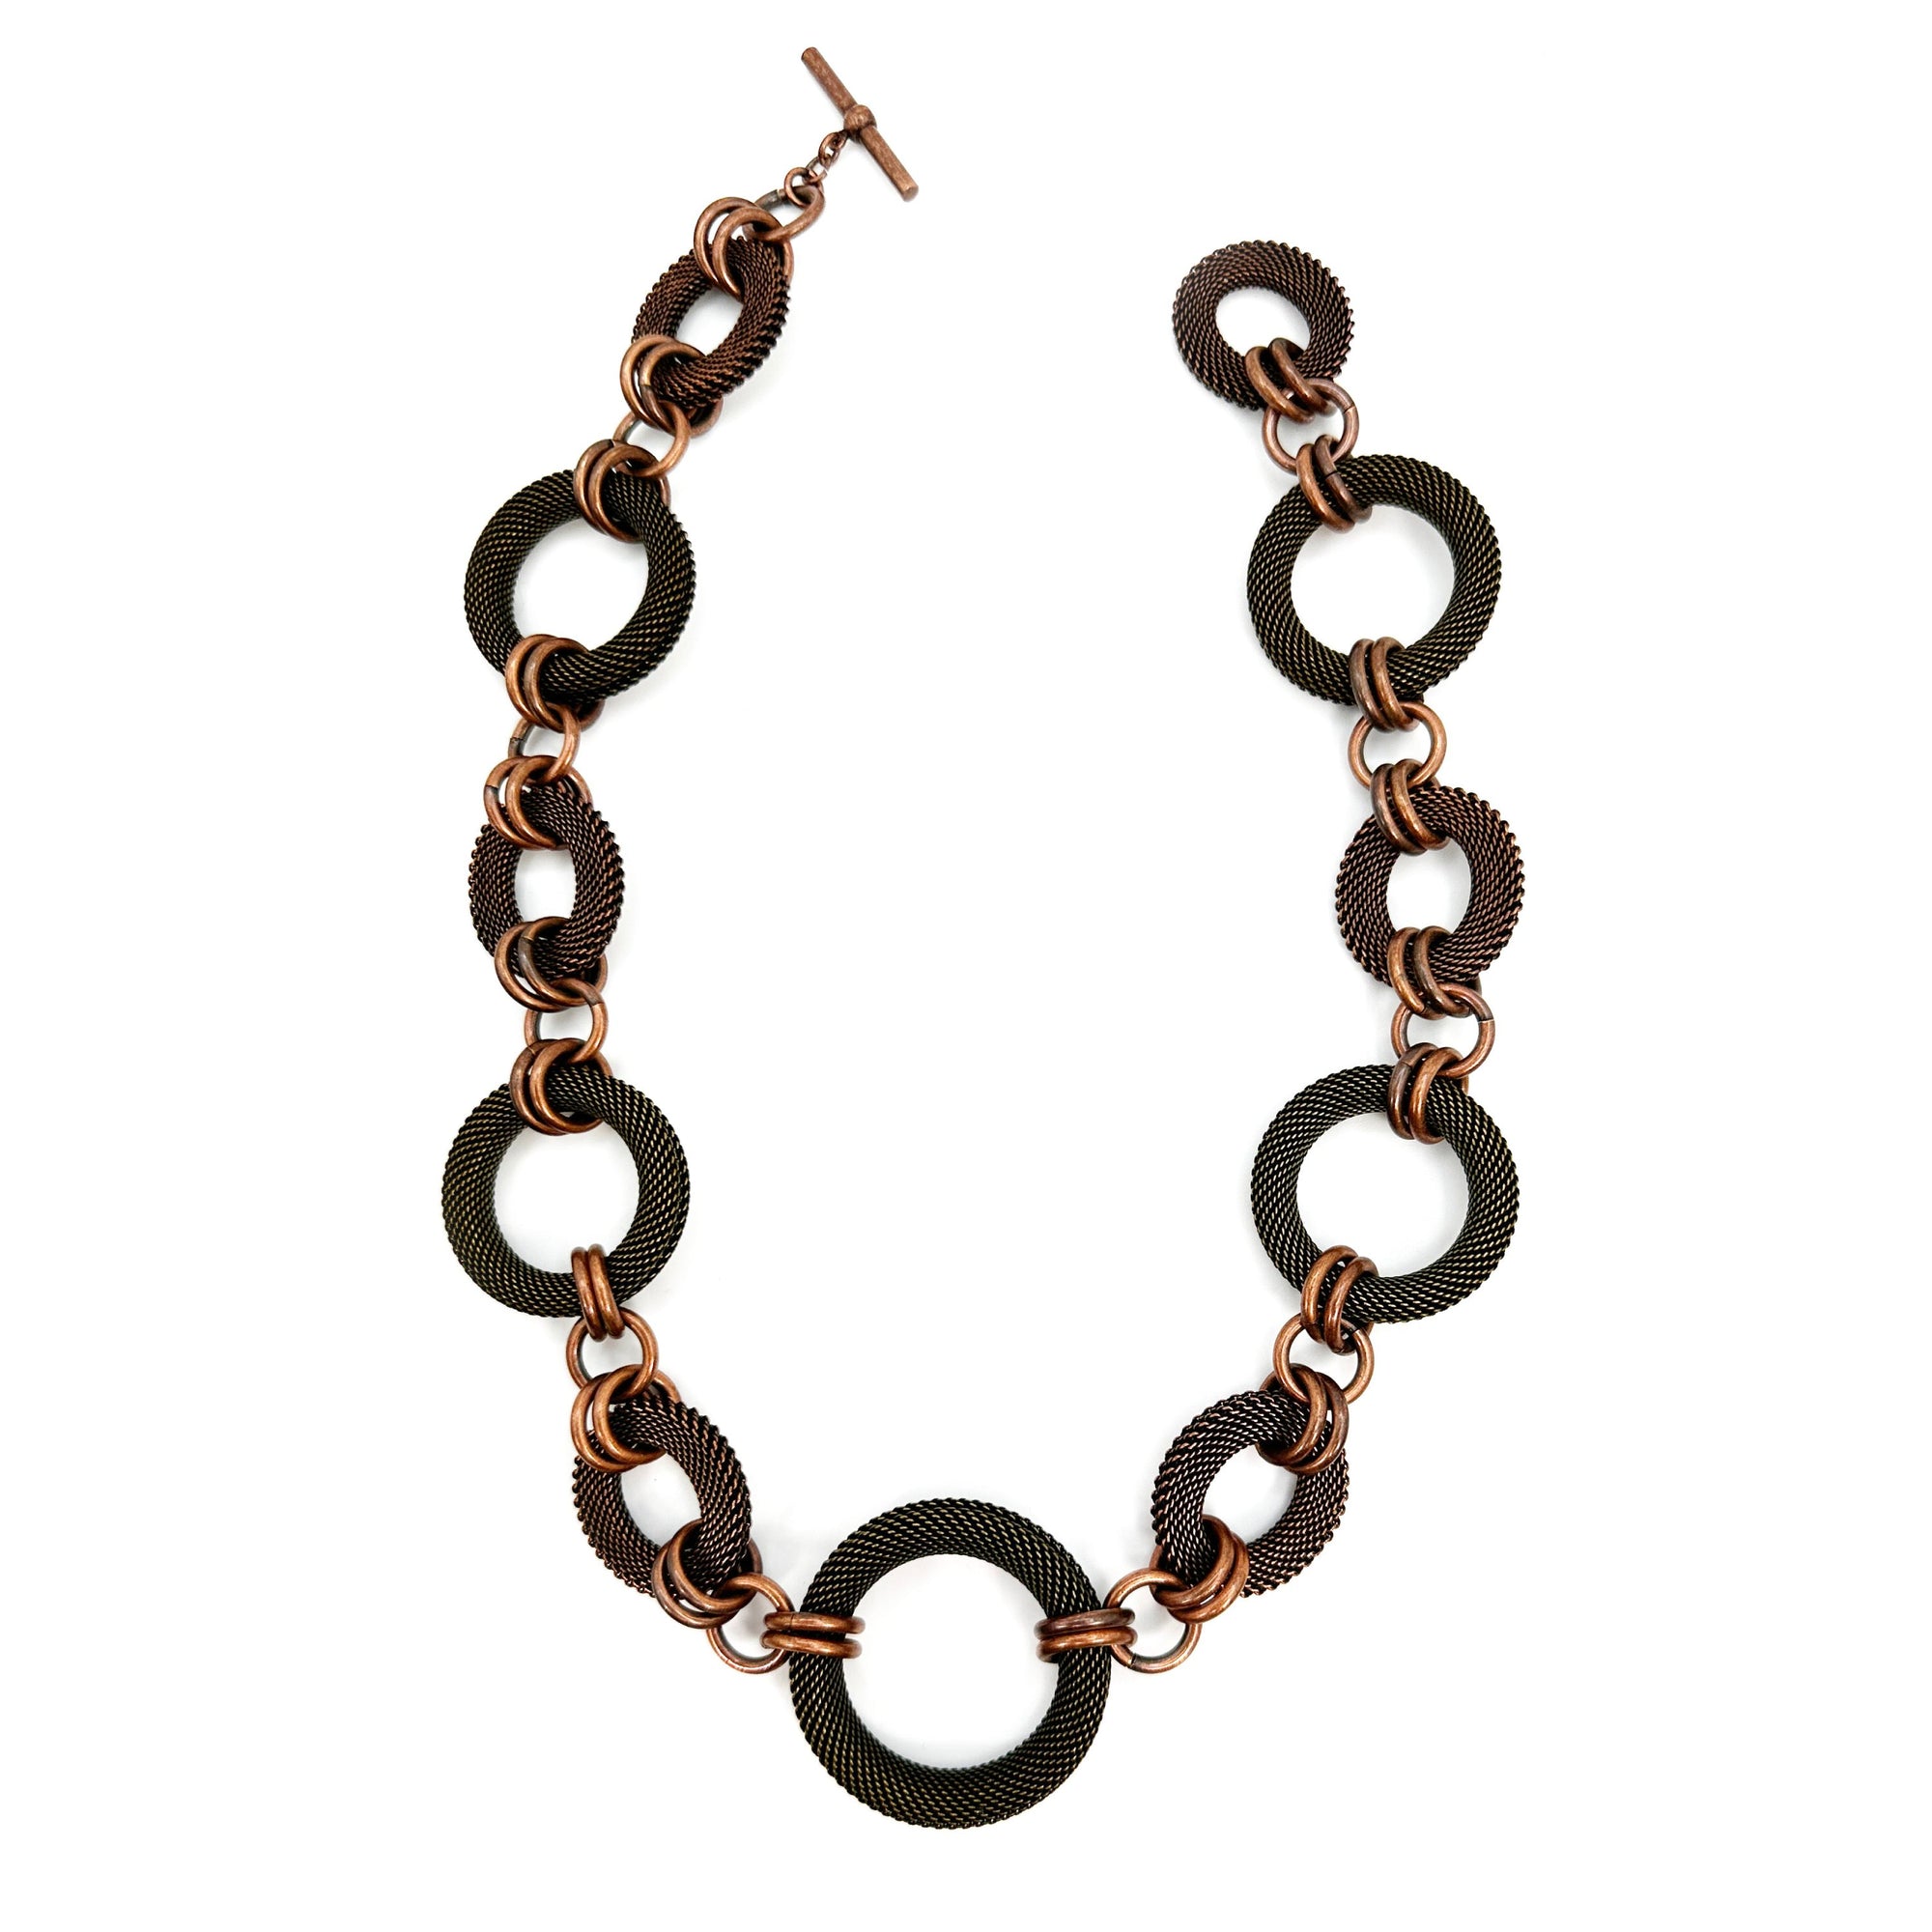 Linked Mesh Ring Necklace